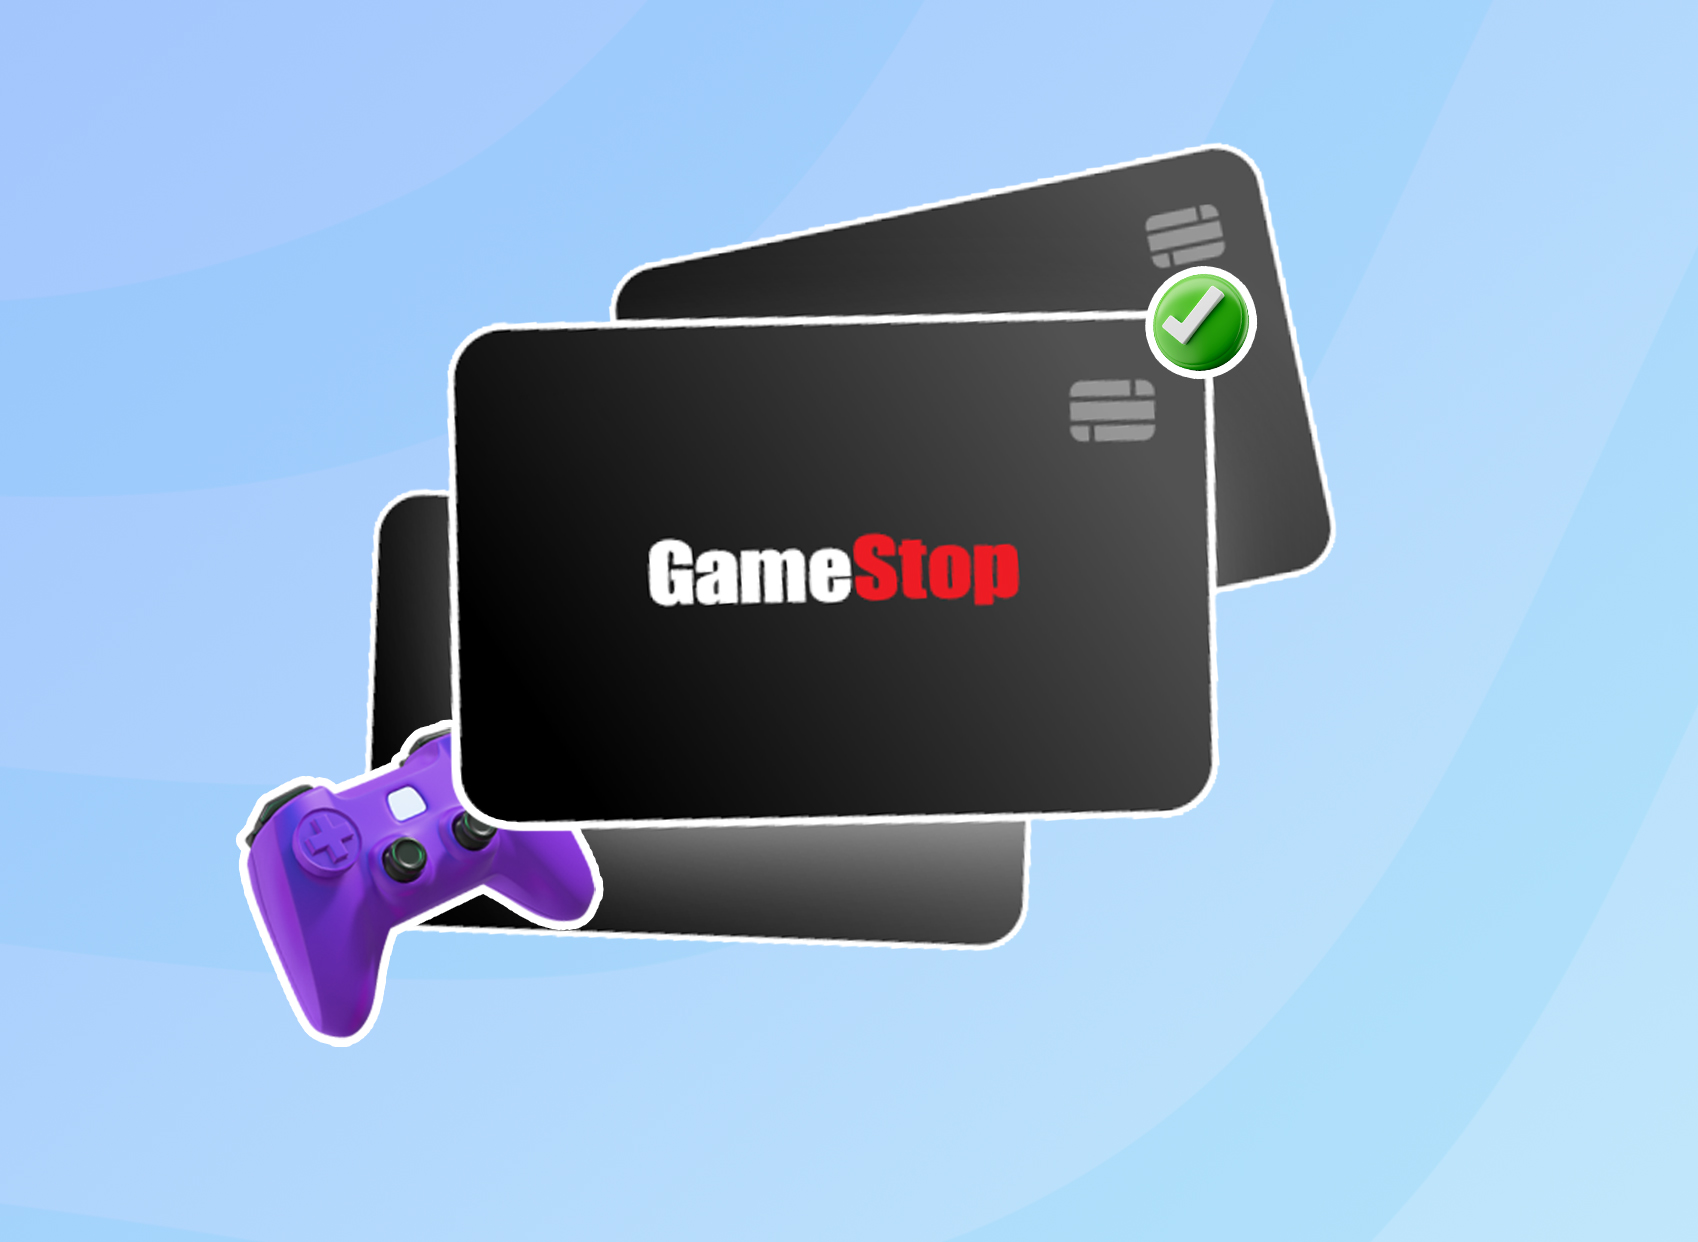 Video Game Gift Card Deals Buy 1 Get 1 15% Off!